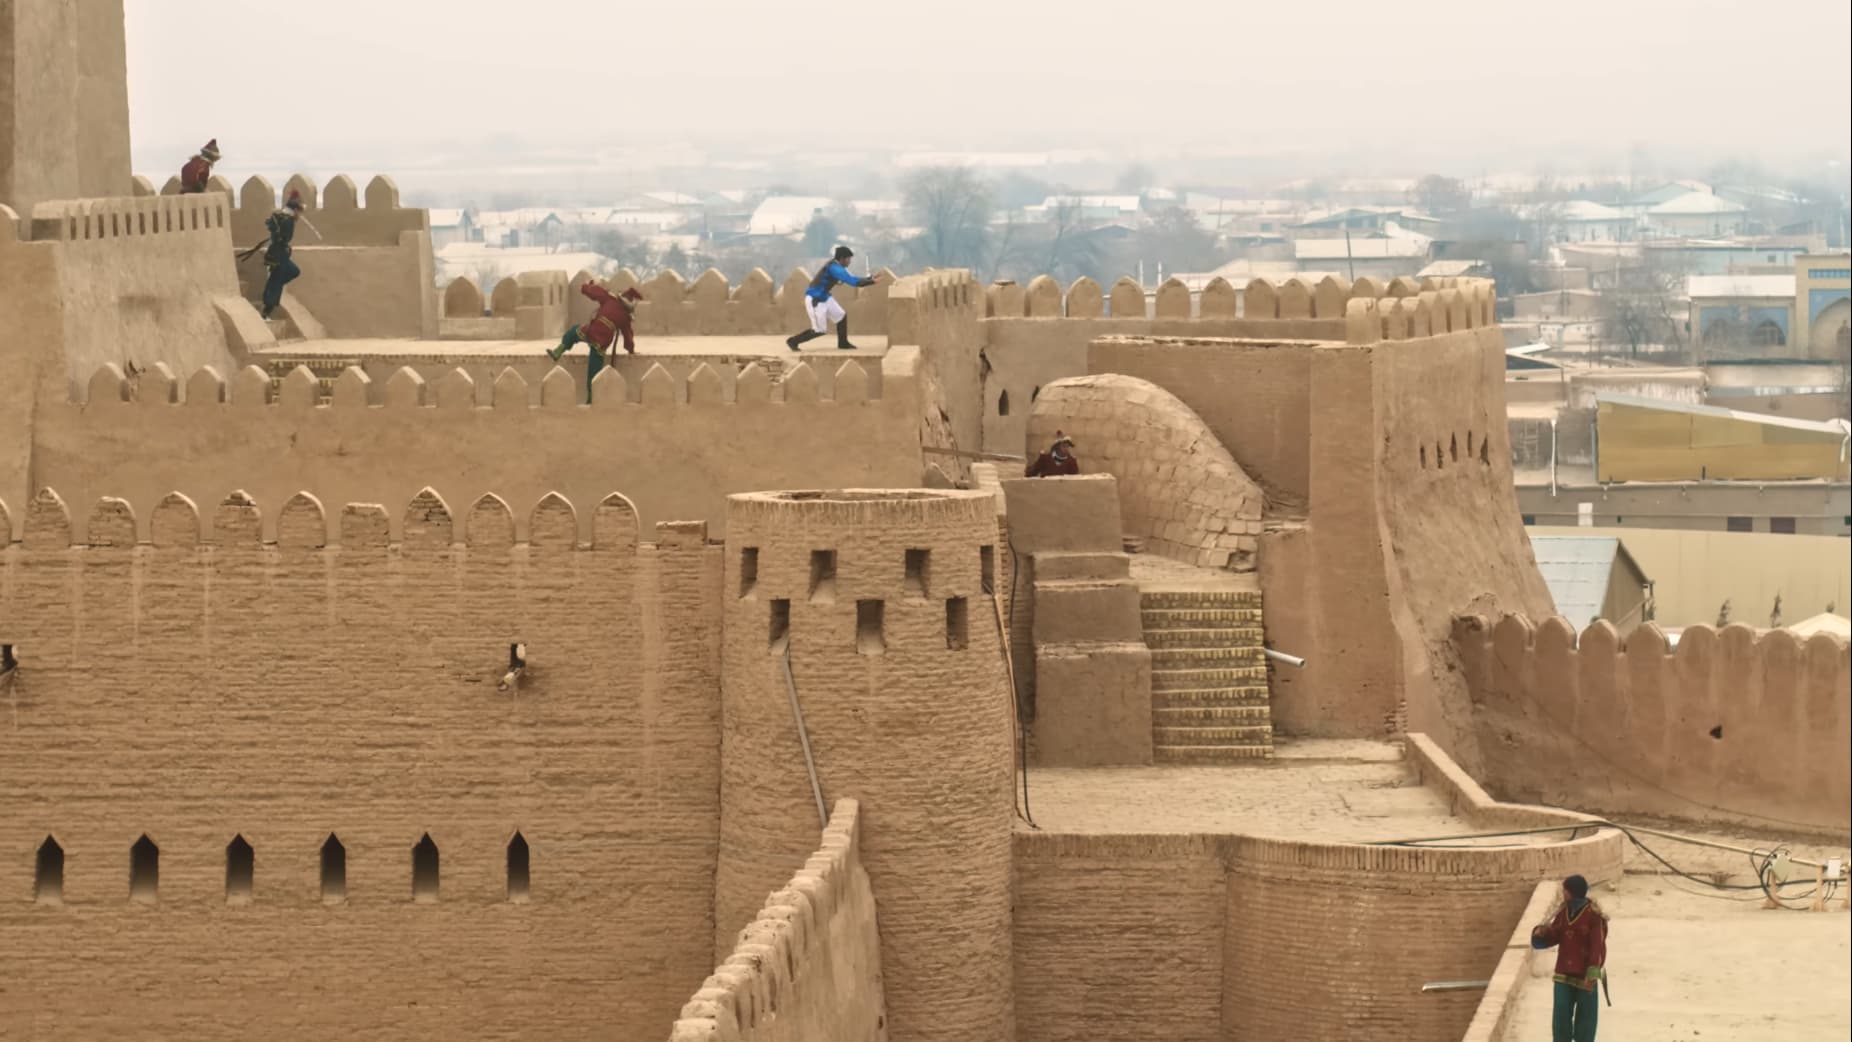 Prince of Persia live action parkour